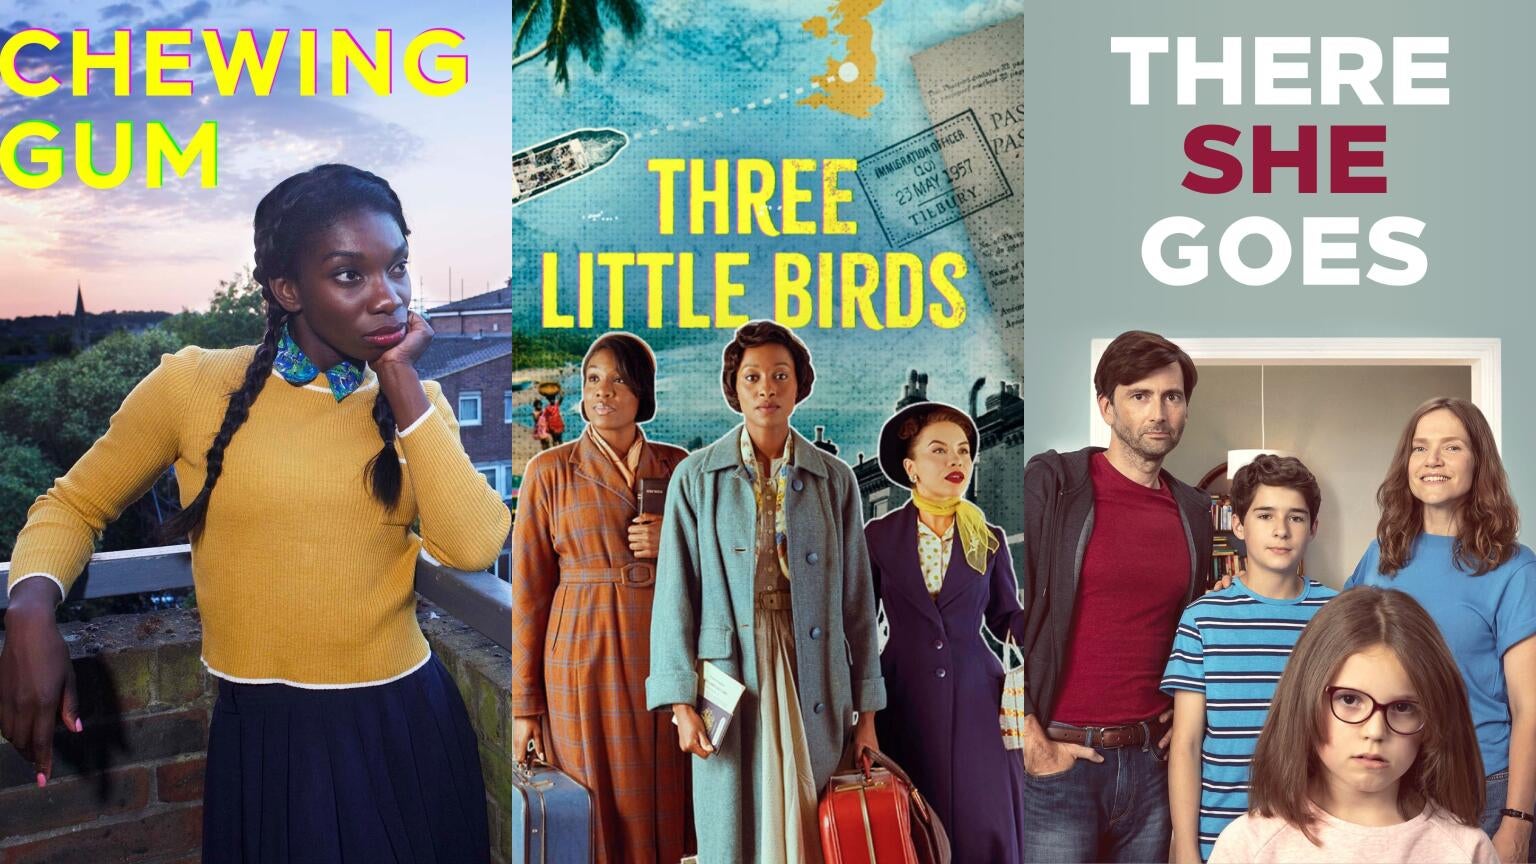 Posters for "Chewing Gum," "Three Little Birds," and "There She Goes"